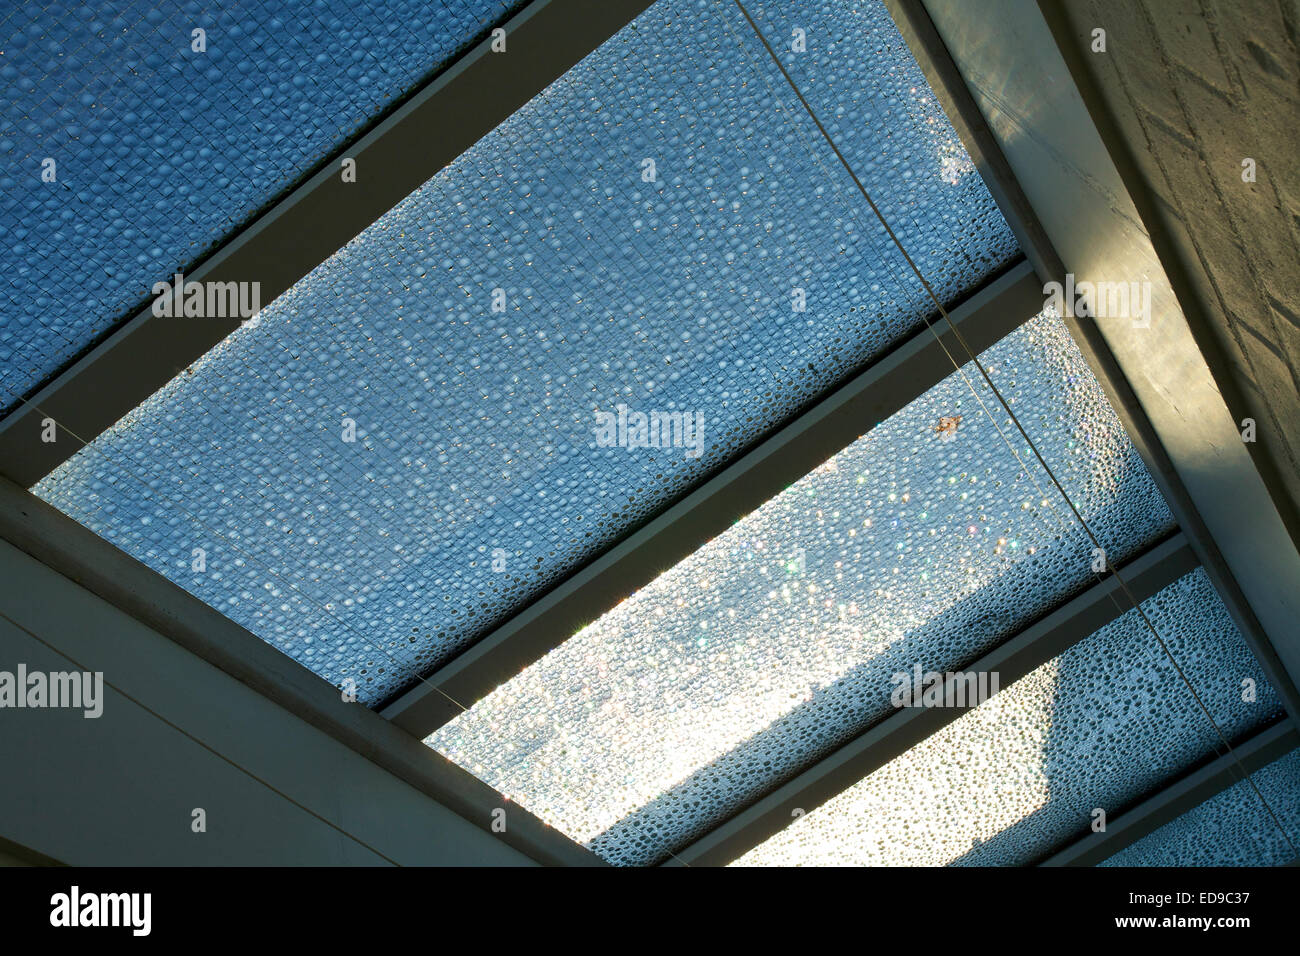 Condensation droplets on underside of single-glazed glass roof Stock Photo